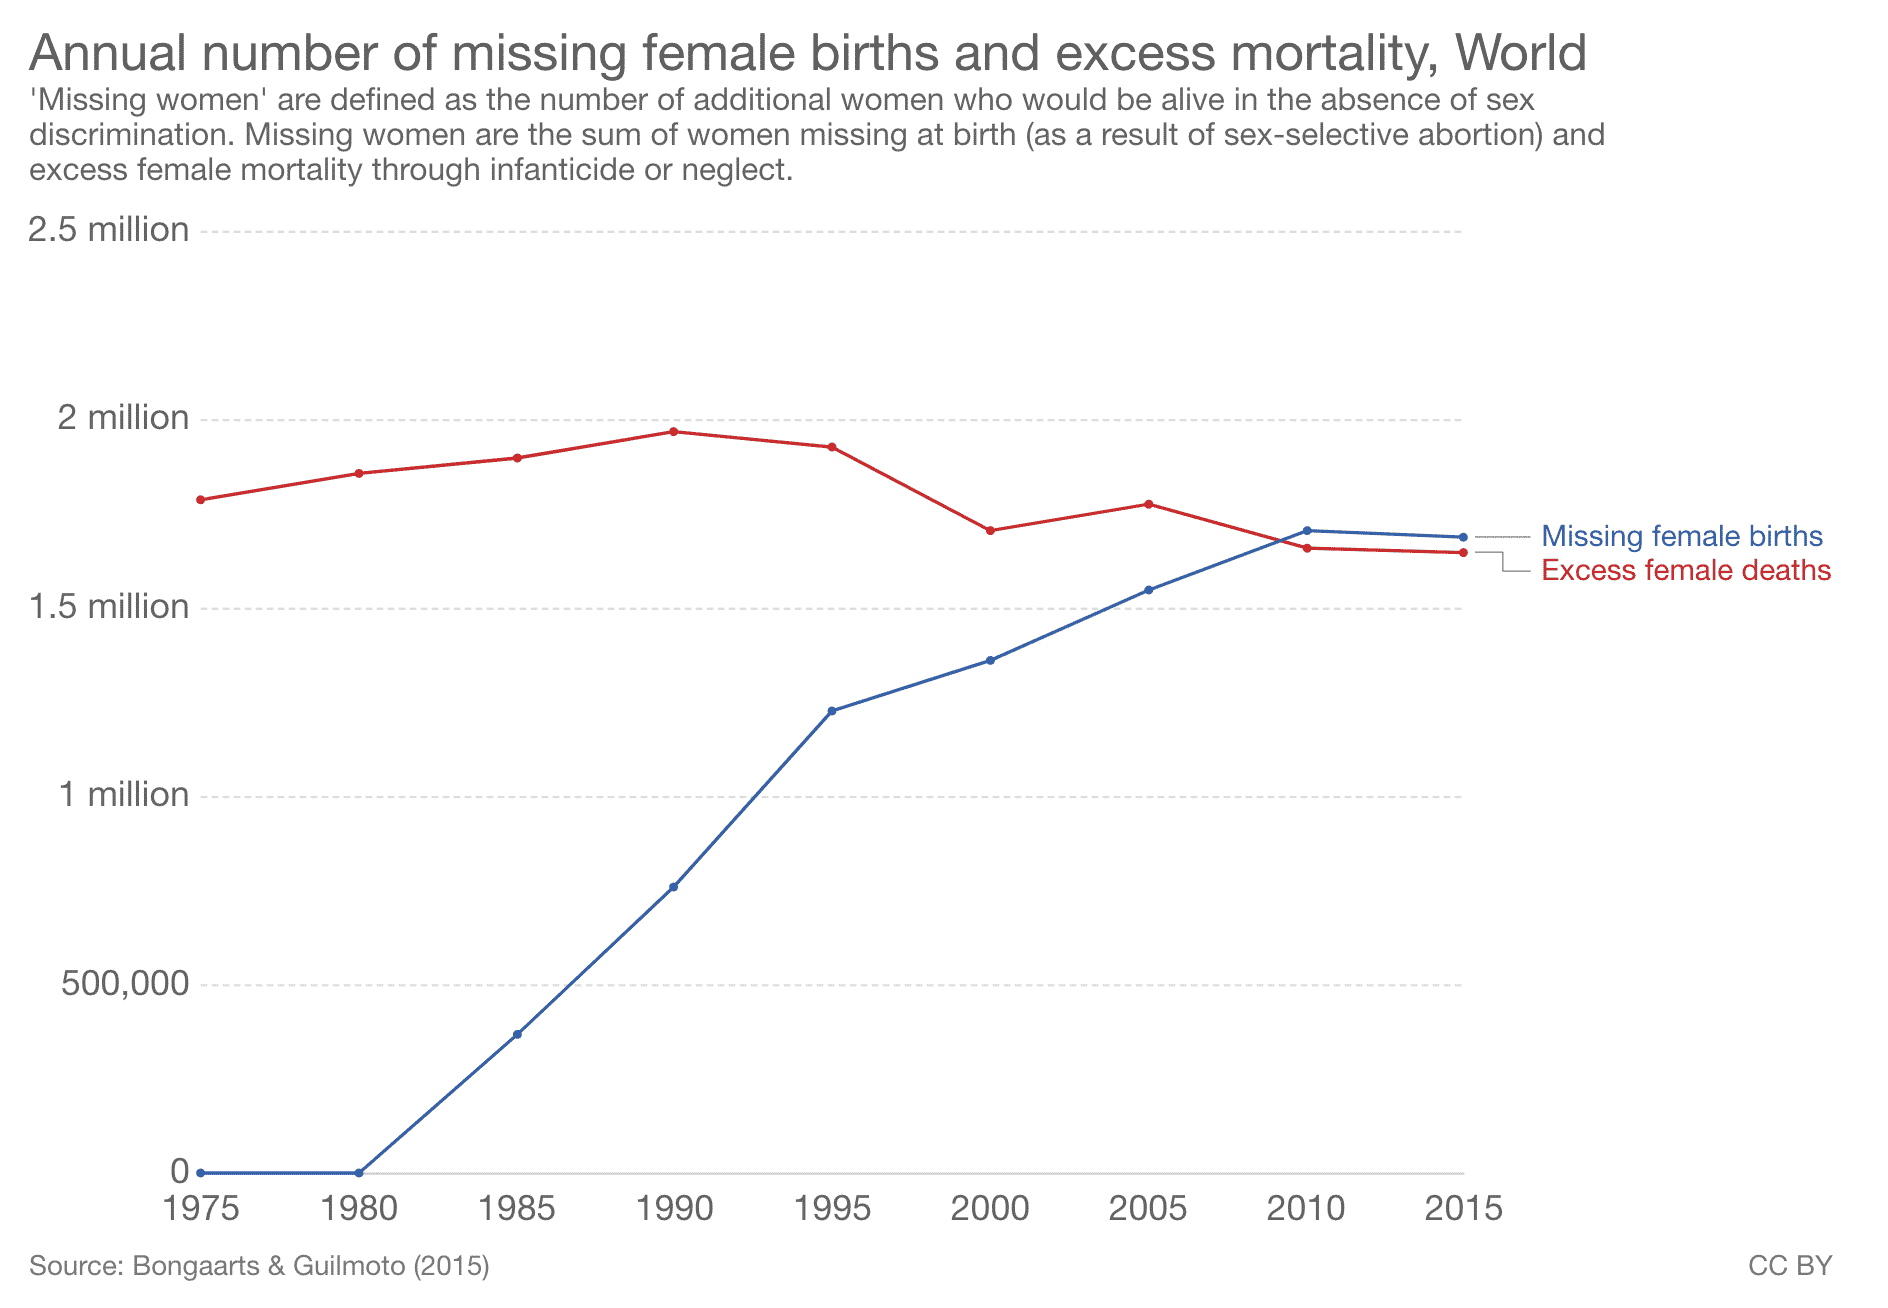 women killed by neglect, infanticide, and sex-selective abortion in the world per year